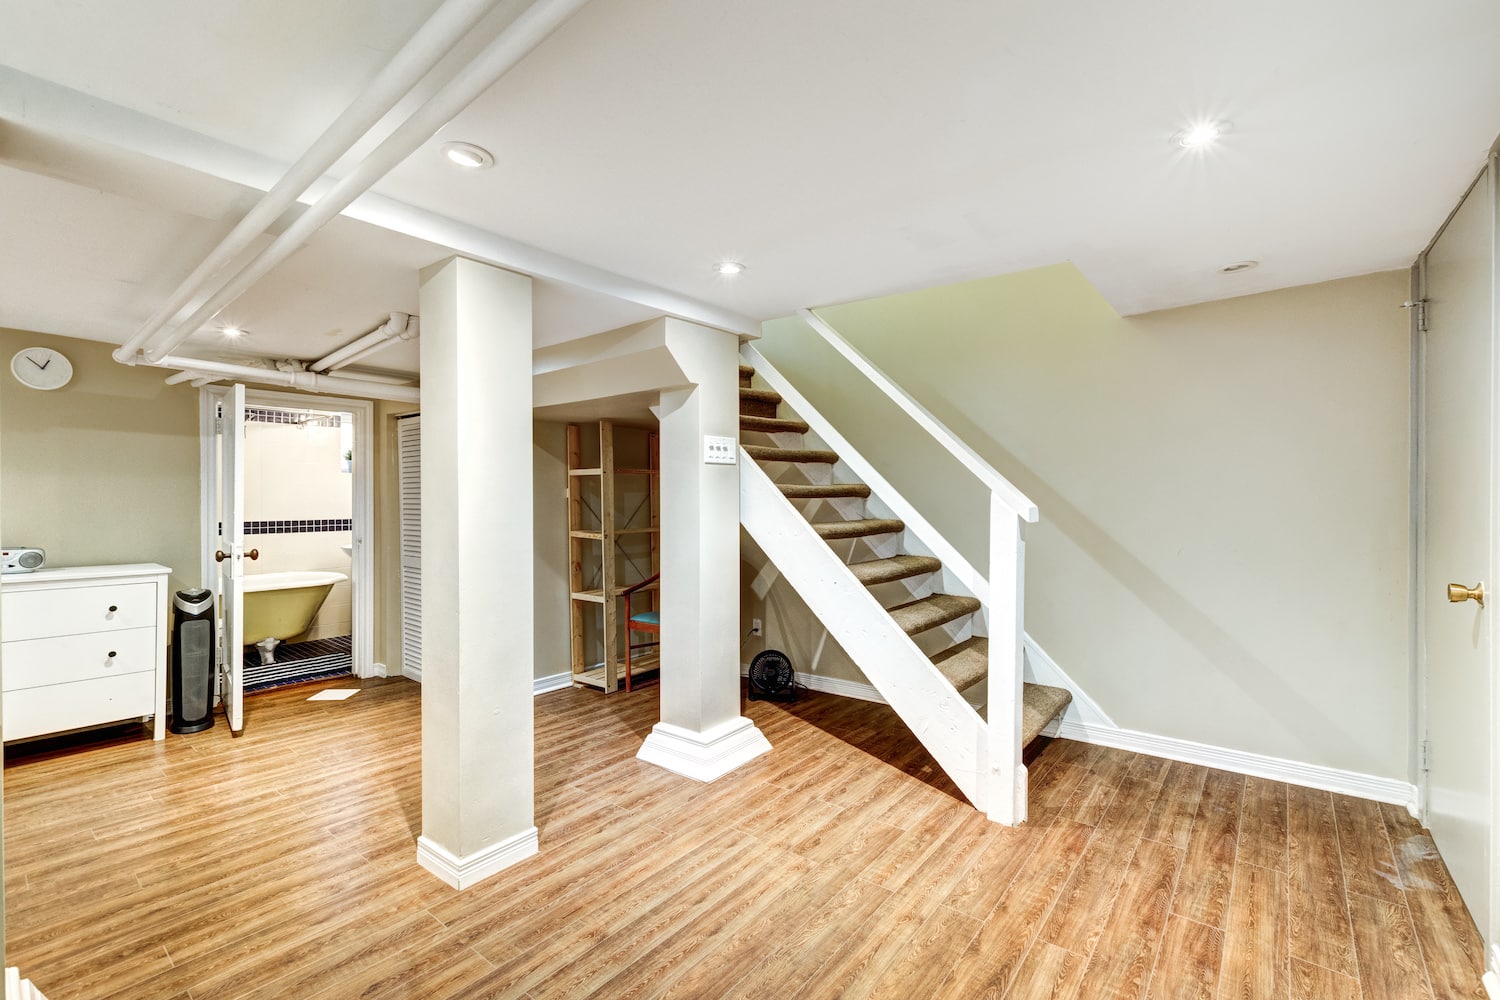 how to finish a basement completed home renovation project